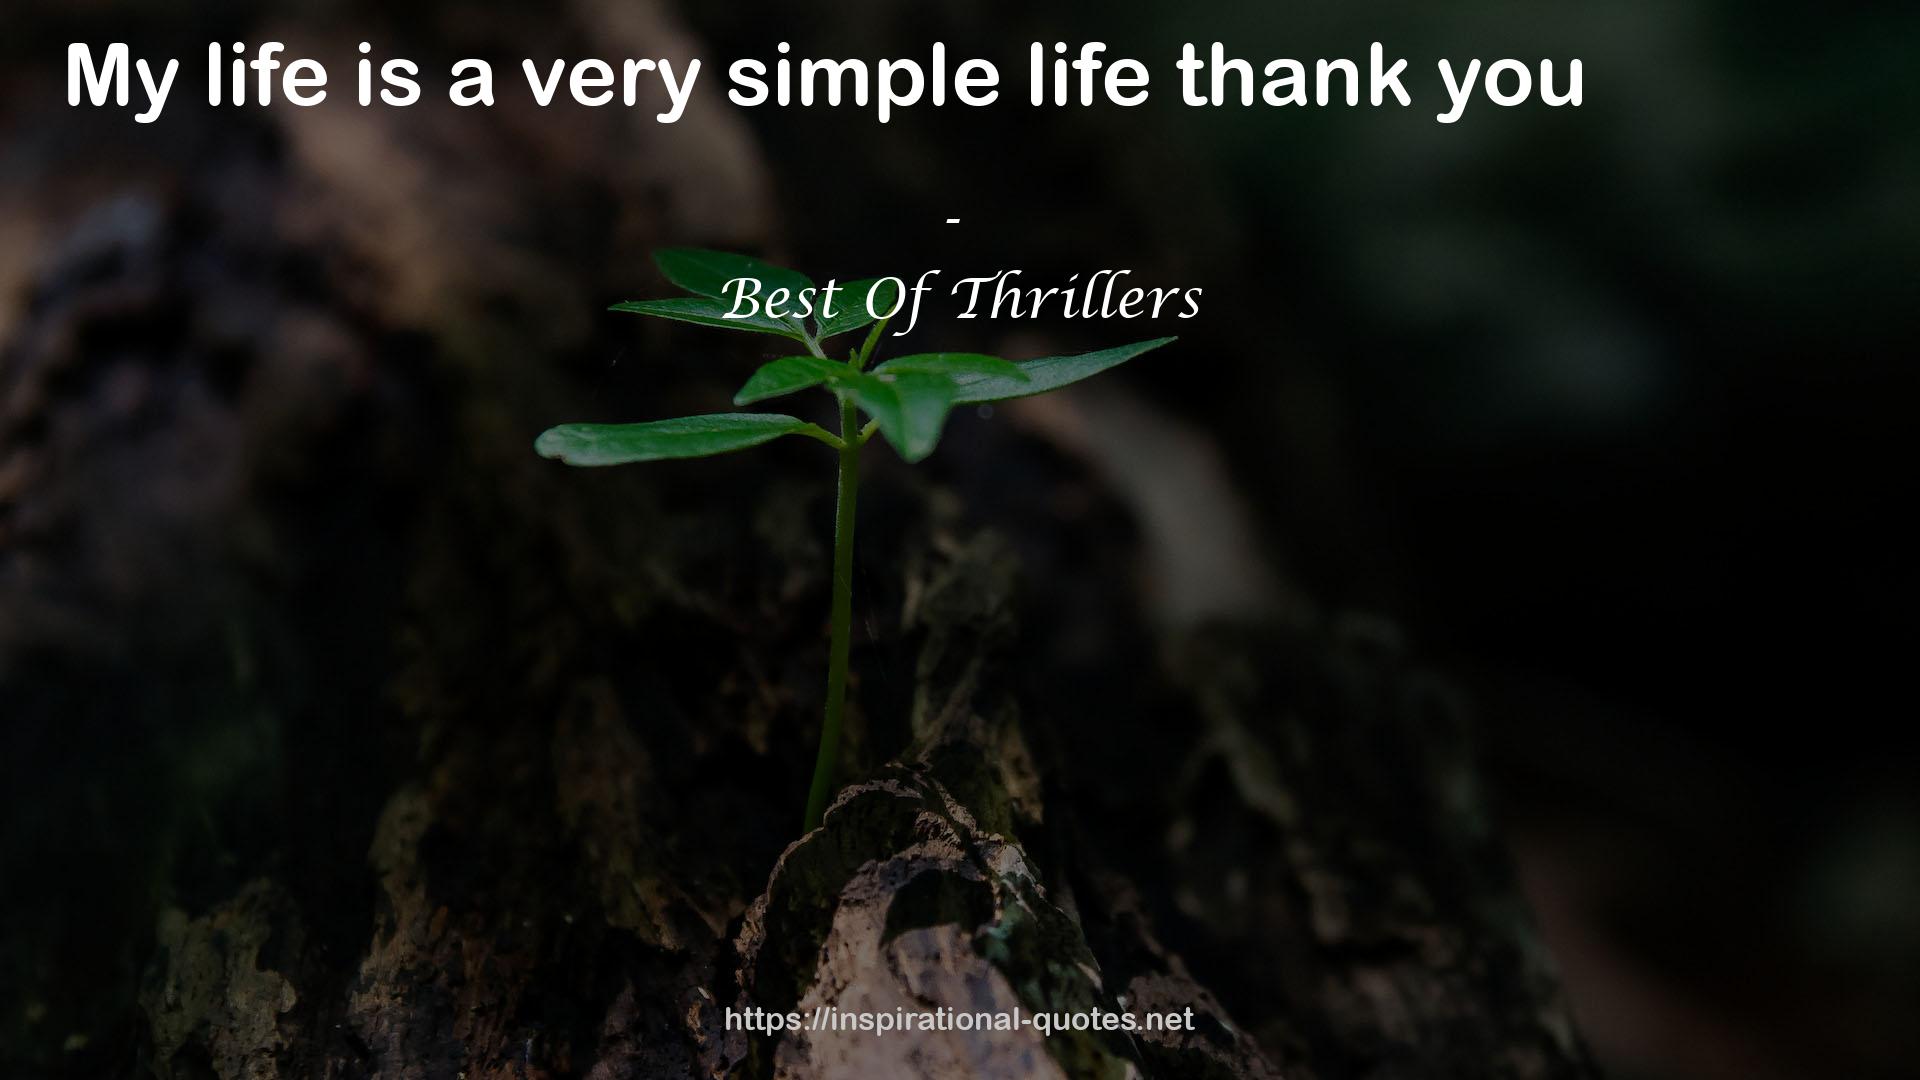 Best Of Thrillers QUOTES